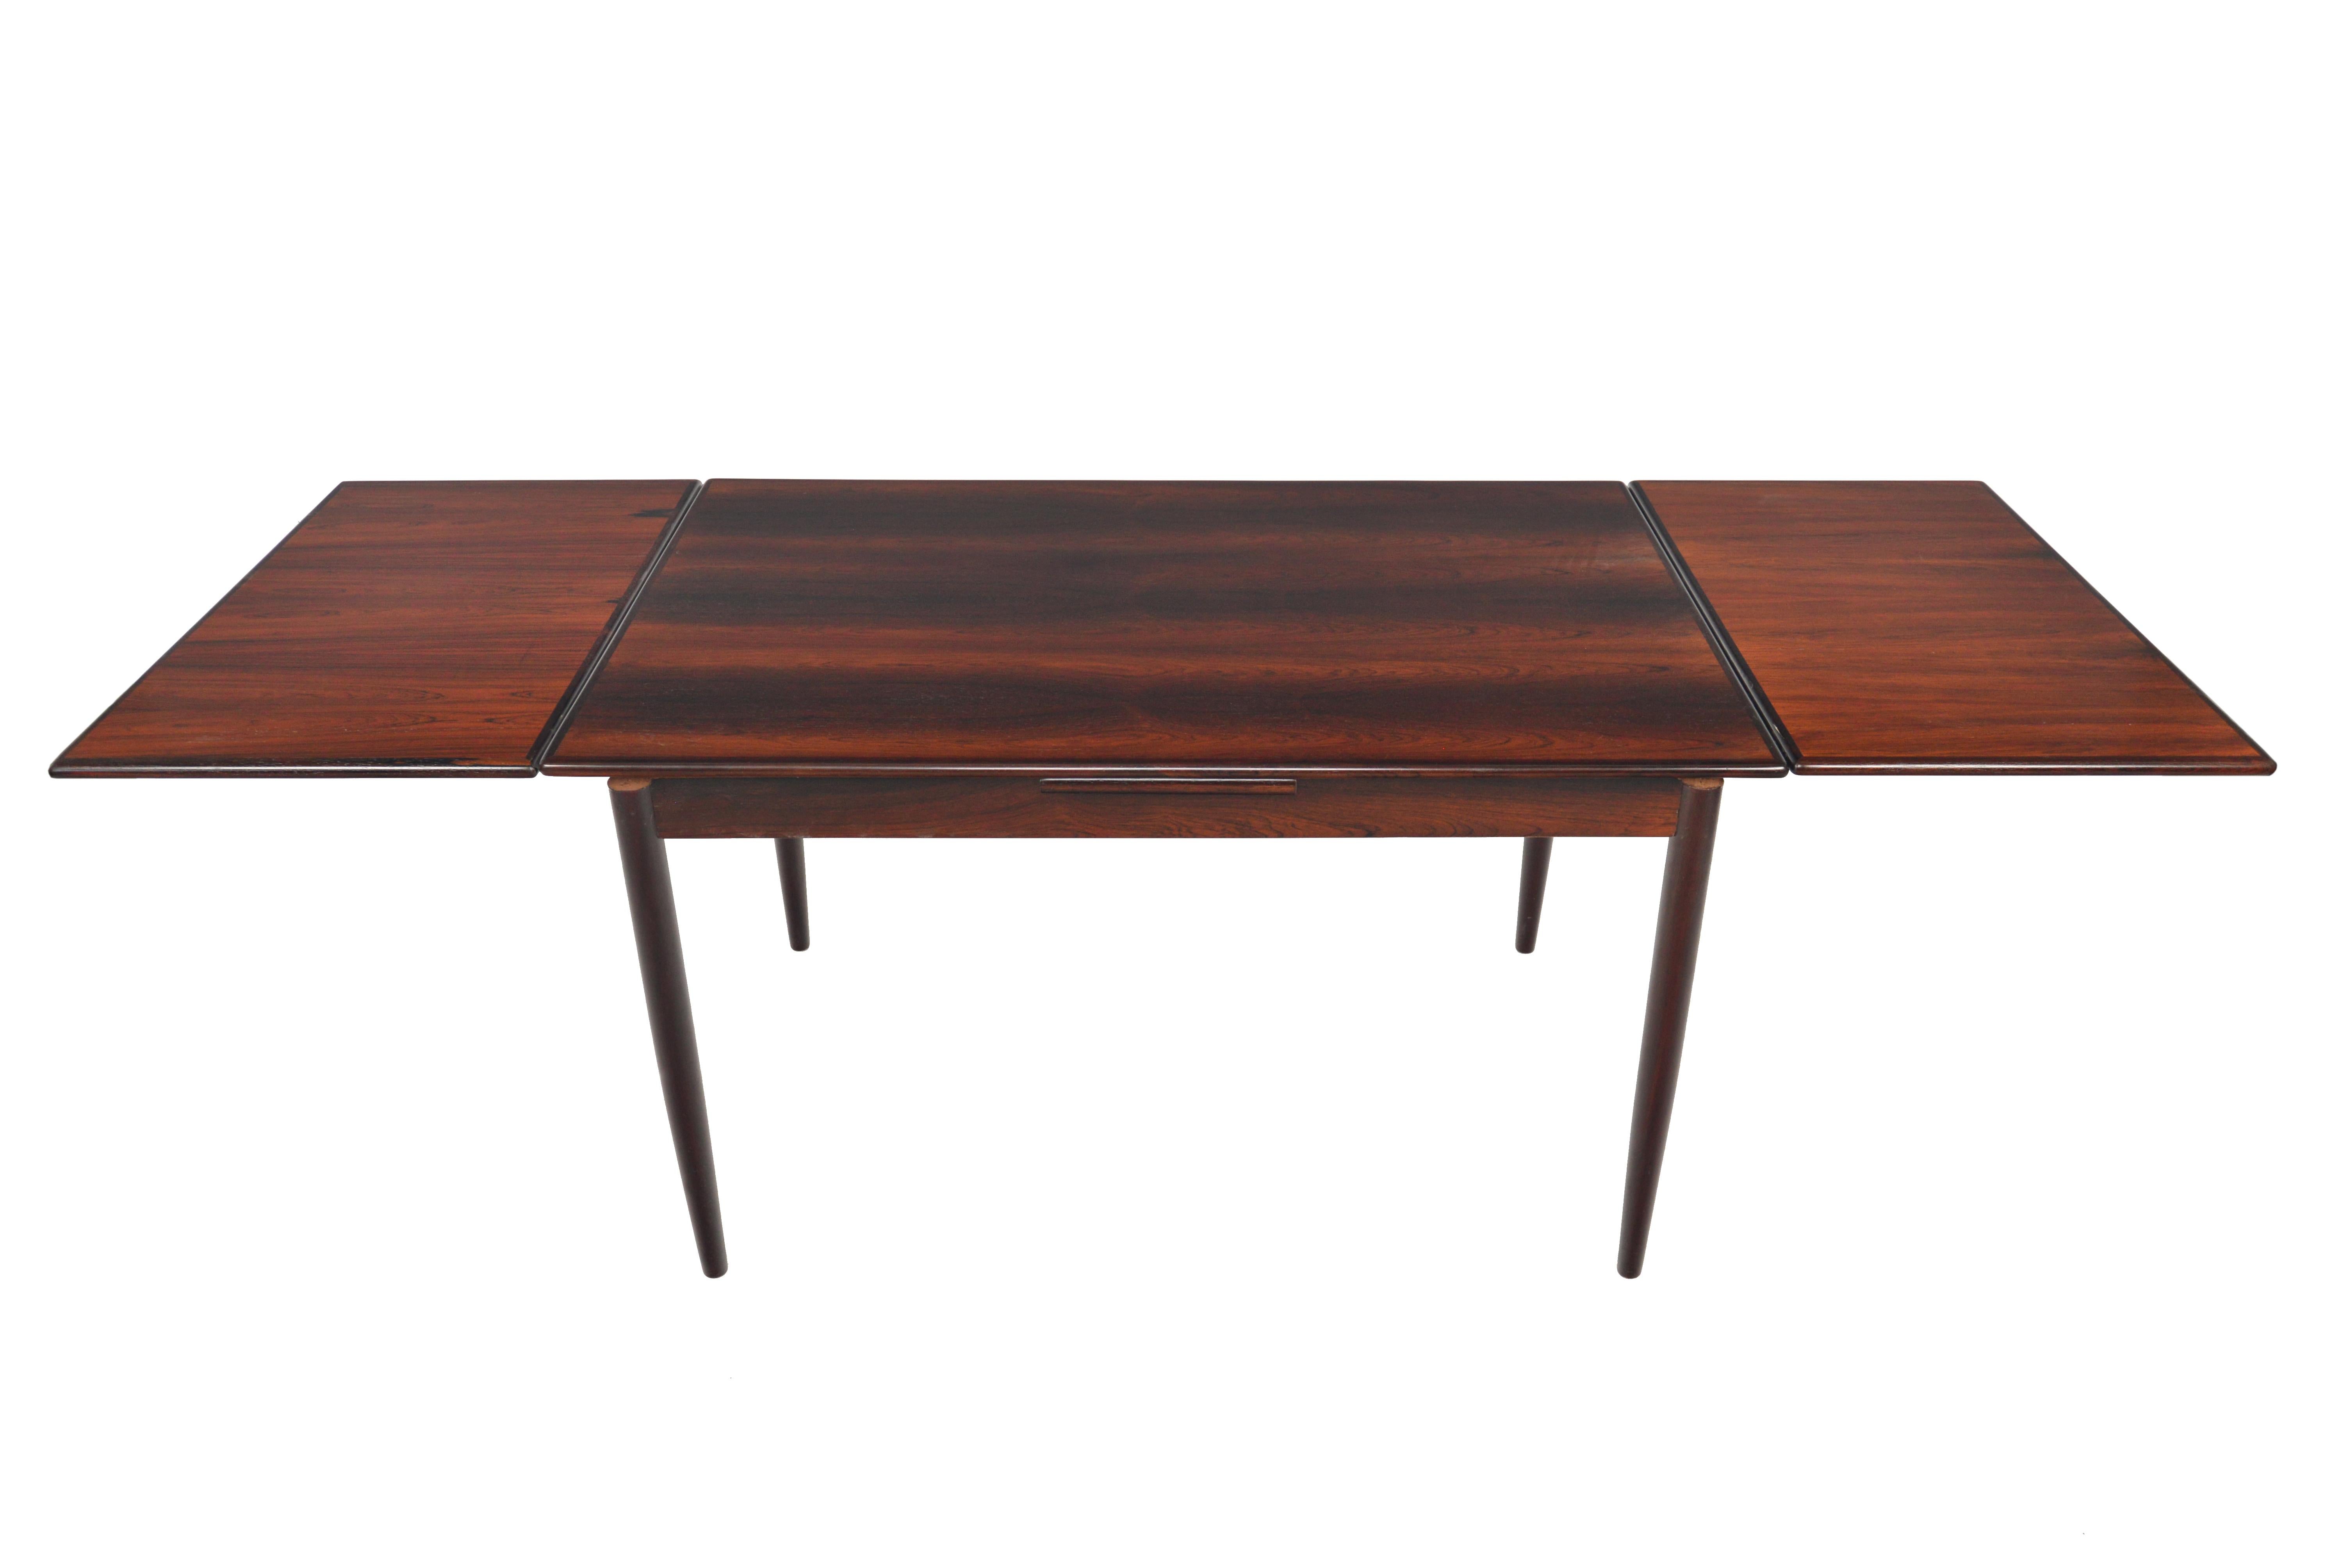 20th Century Refinished Brazilian Rosewood Draw Leaf Dining Table